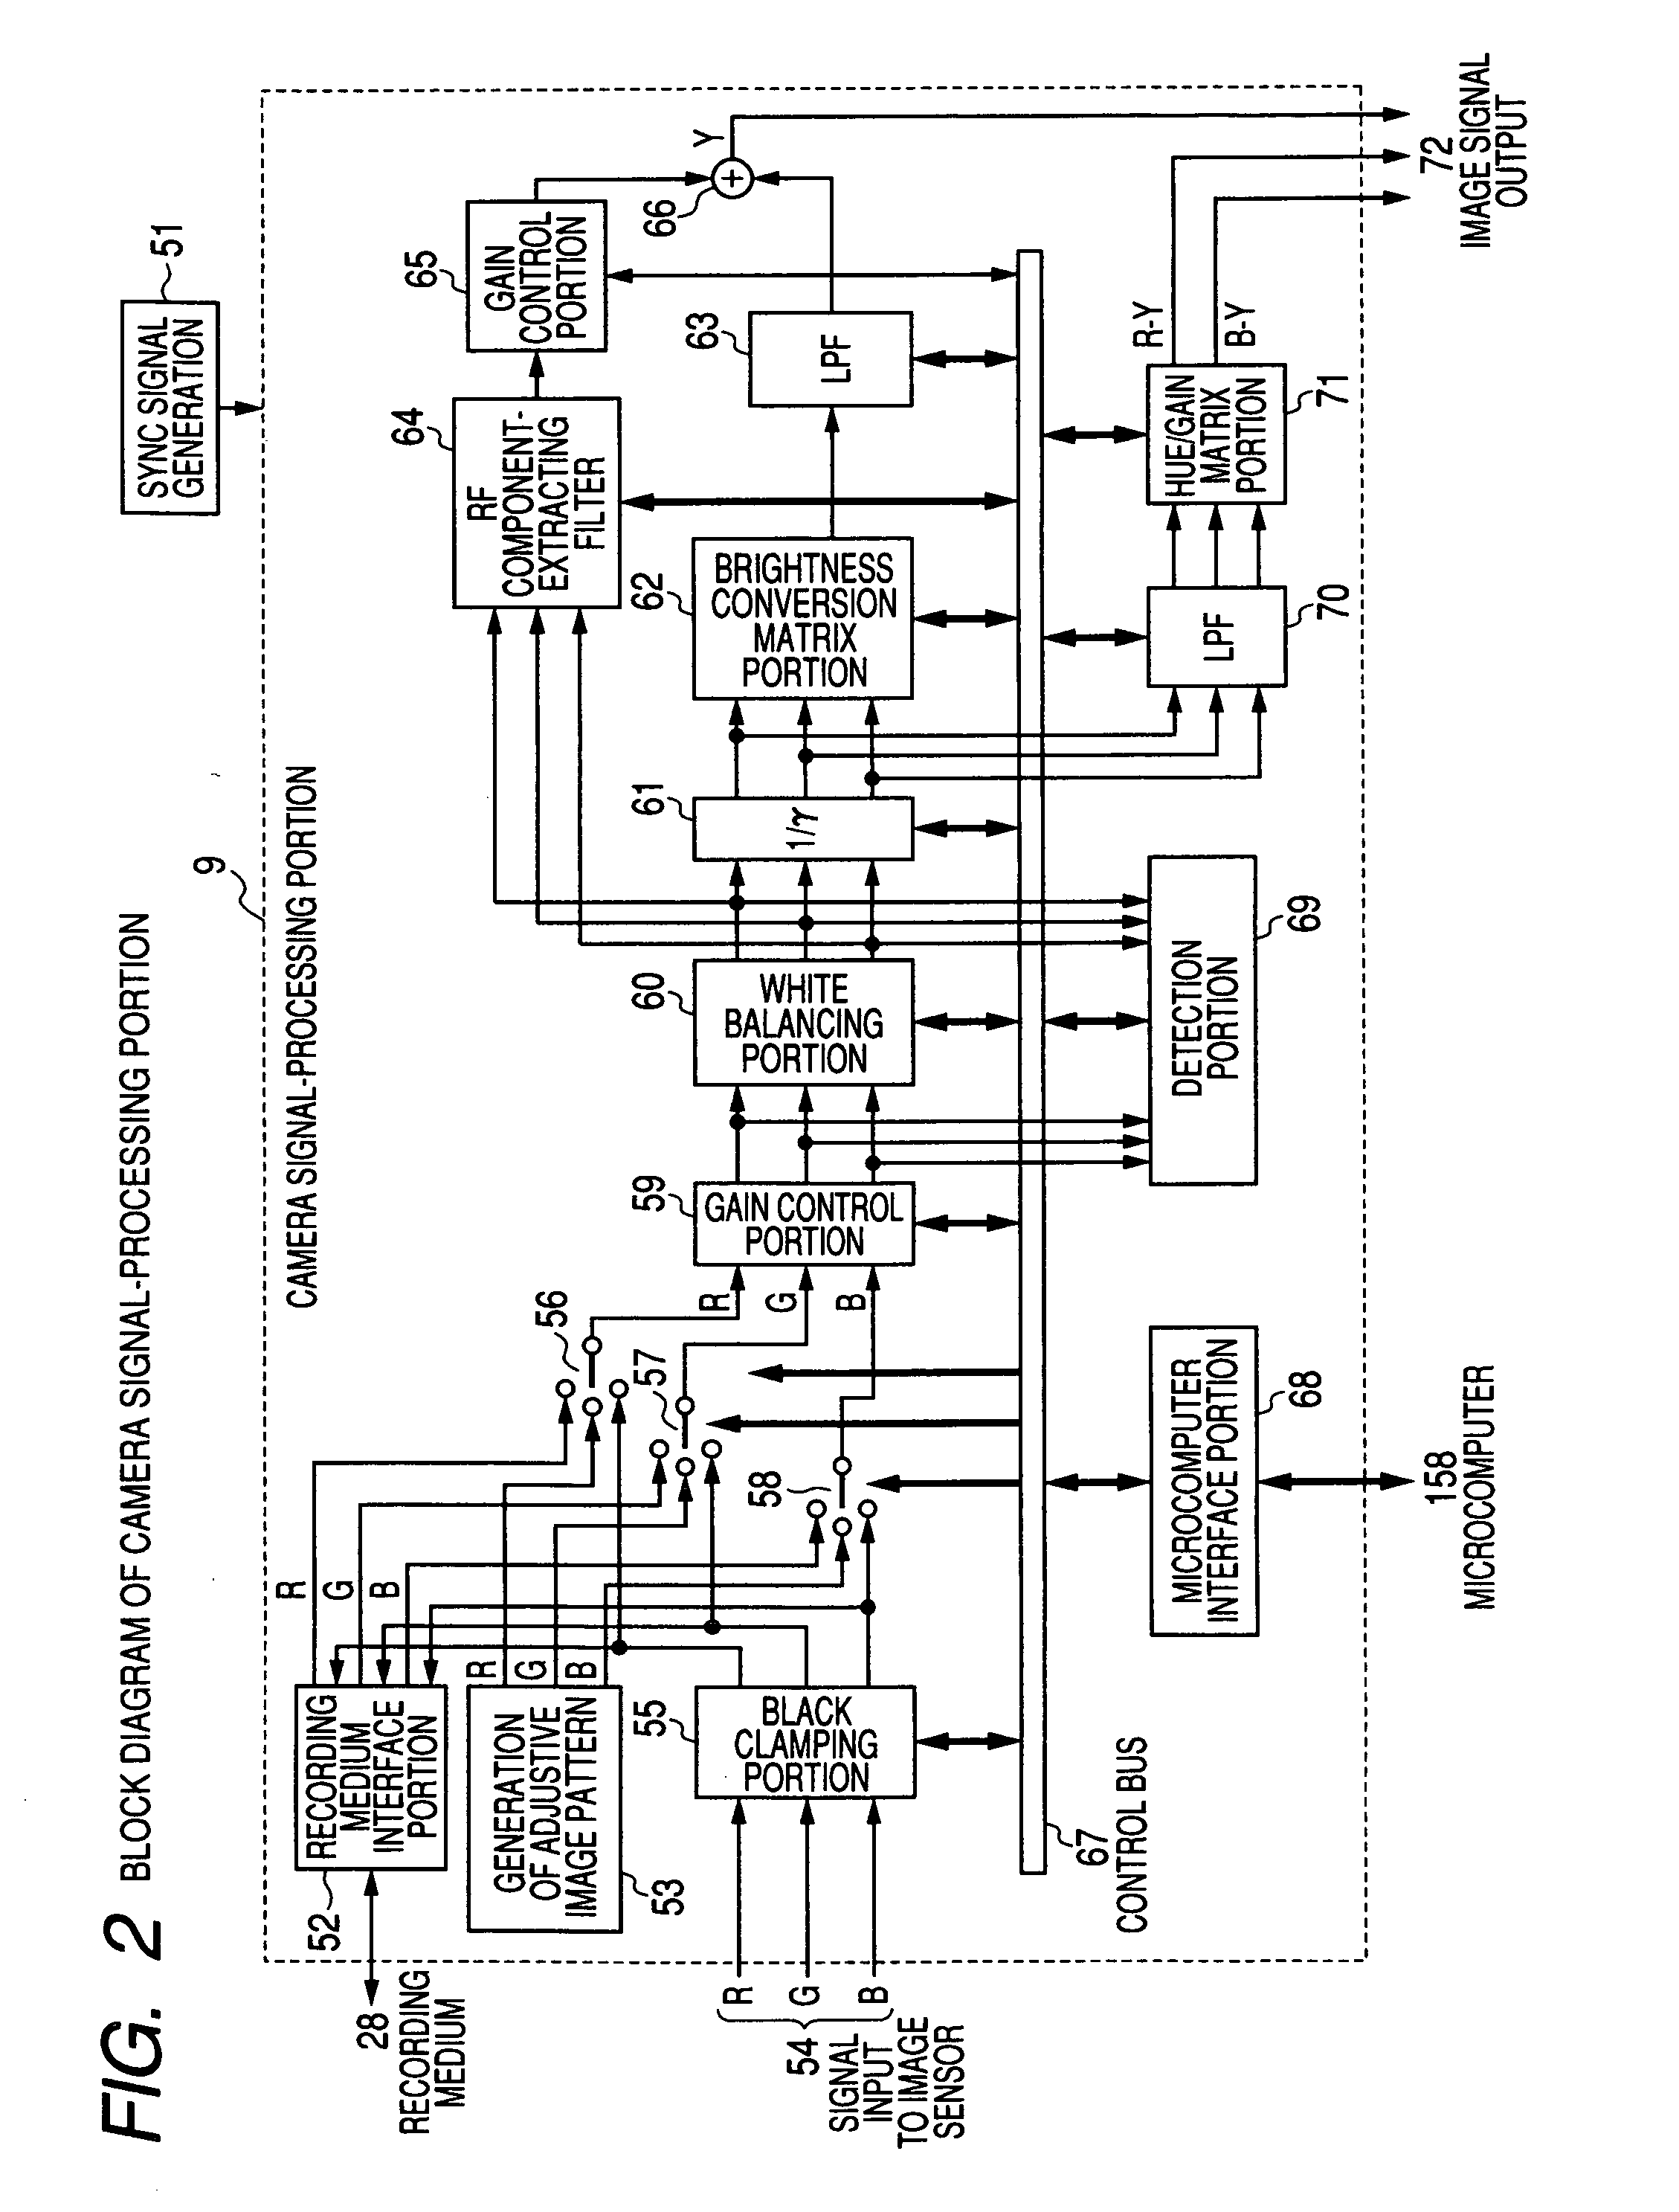 Image signal processing apparatus, method of image signal processing, and image signal processing system